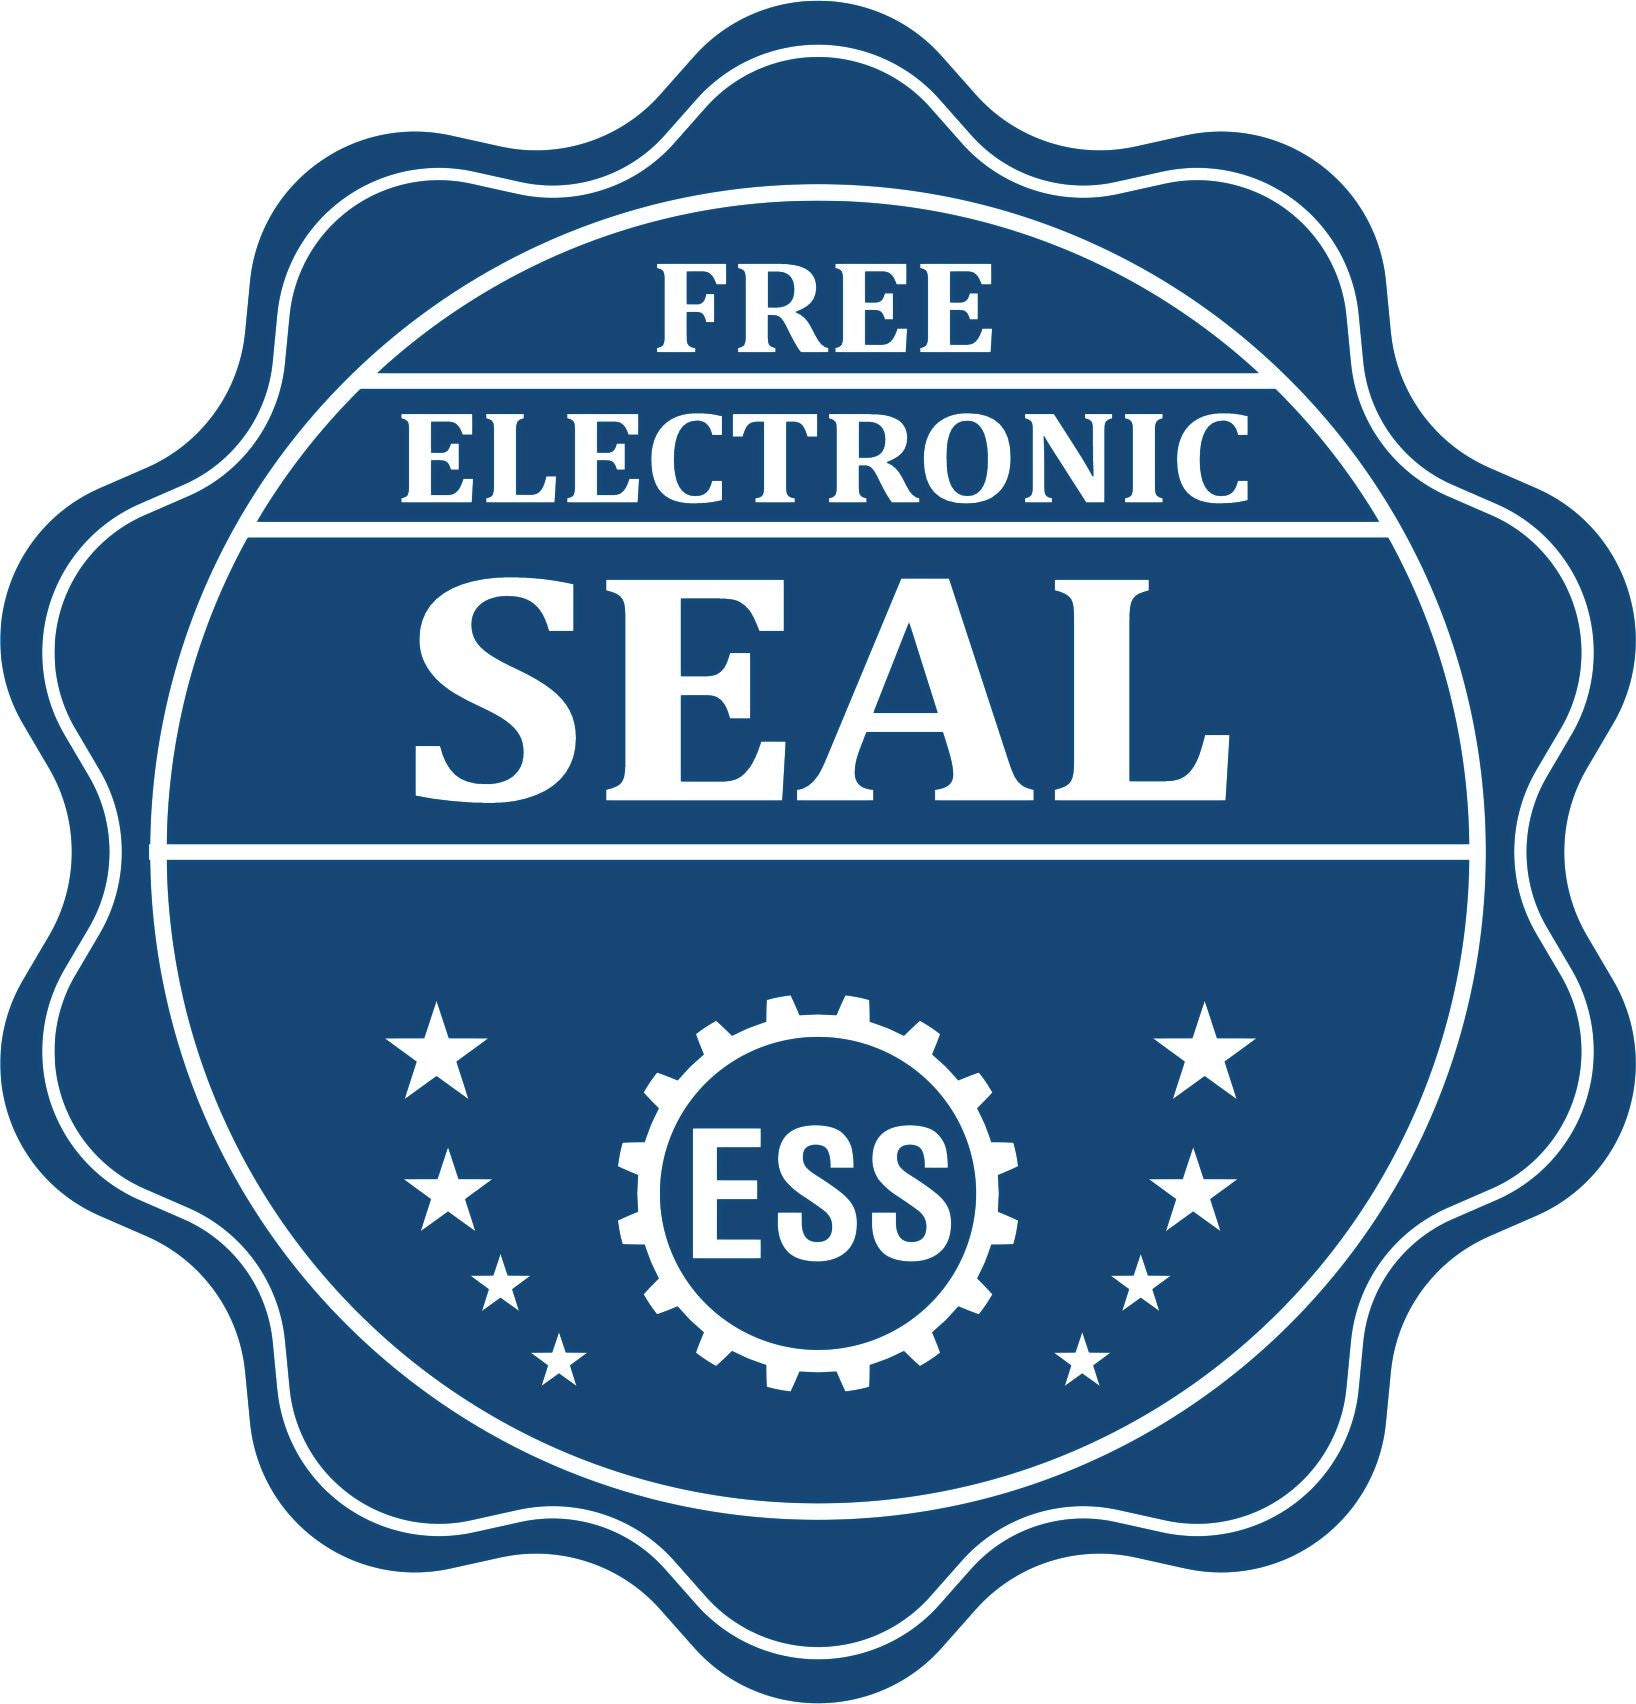 A badge showing a free electronic seal for the Premium MaxLight Pre-Inked Delaware Landscape Architectural Stamp with stars and the ESS gear on the emblem.